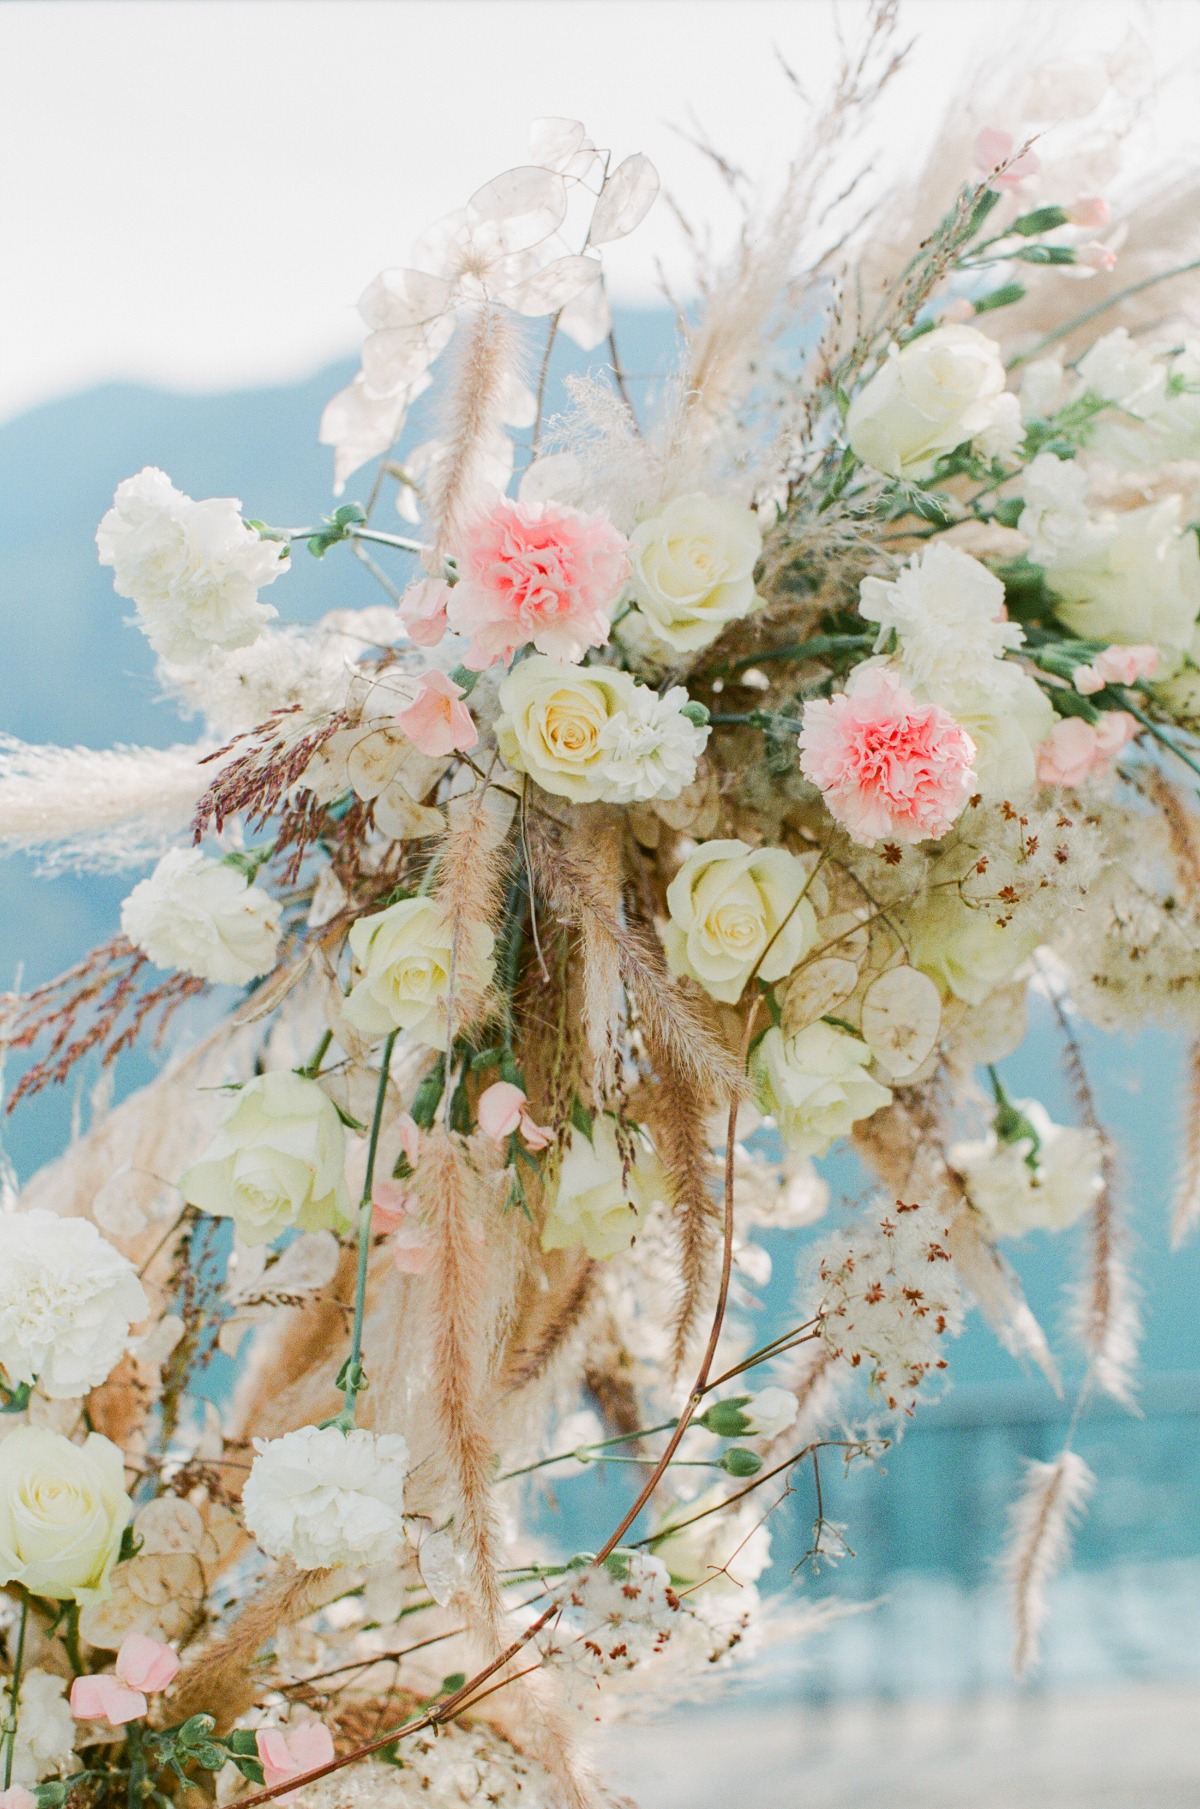 This Romantic Elopement Inspiration On Lake Como Is What Dreams Are Made Of